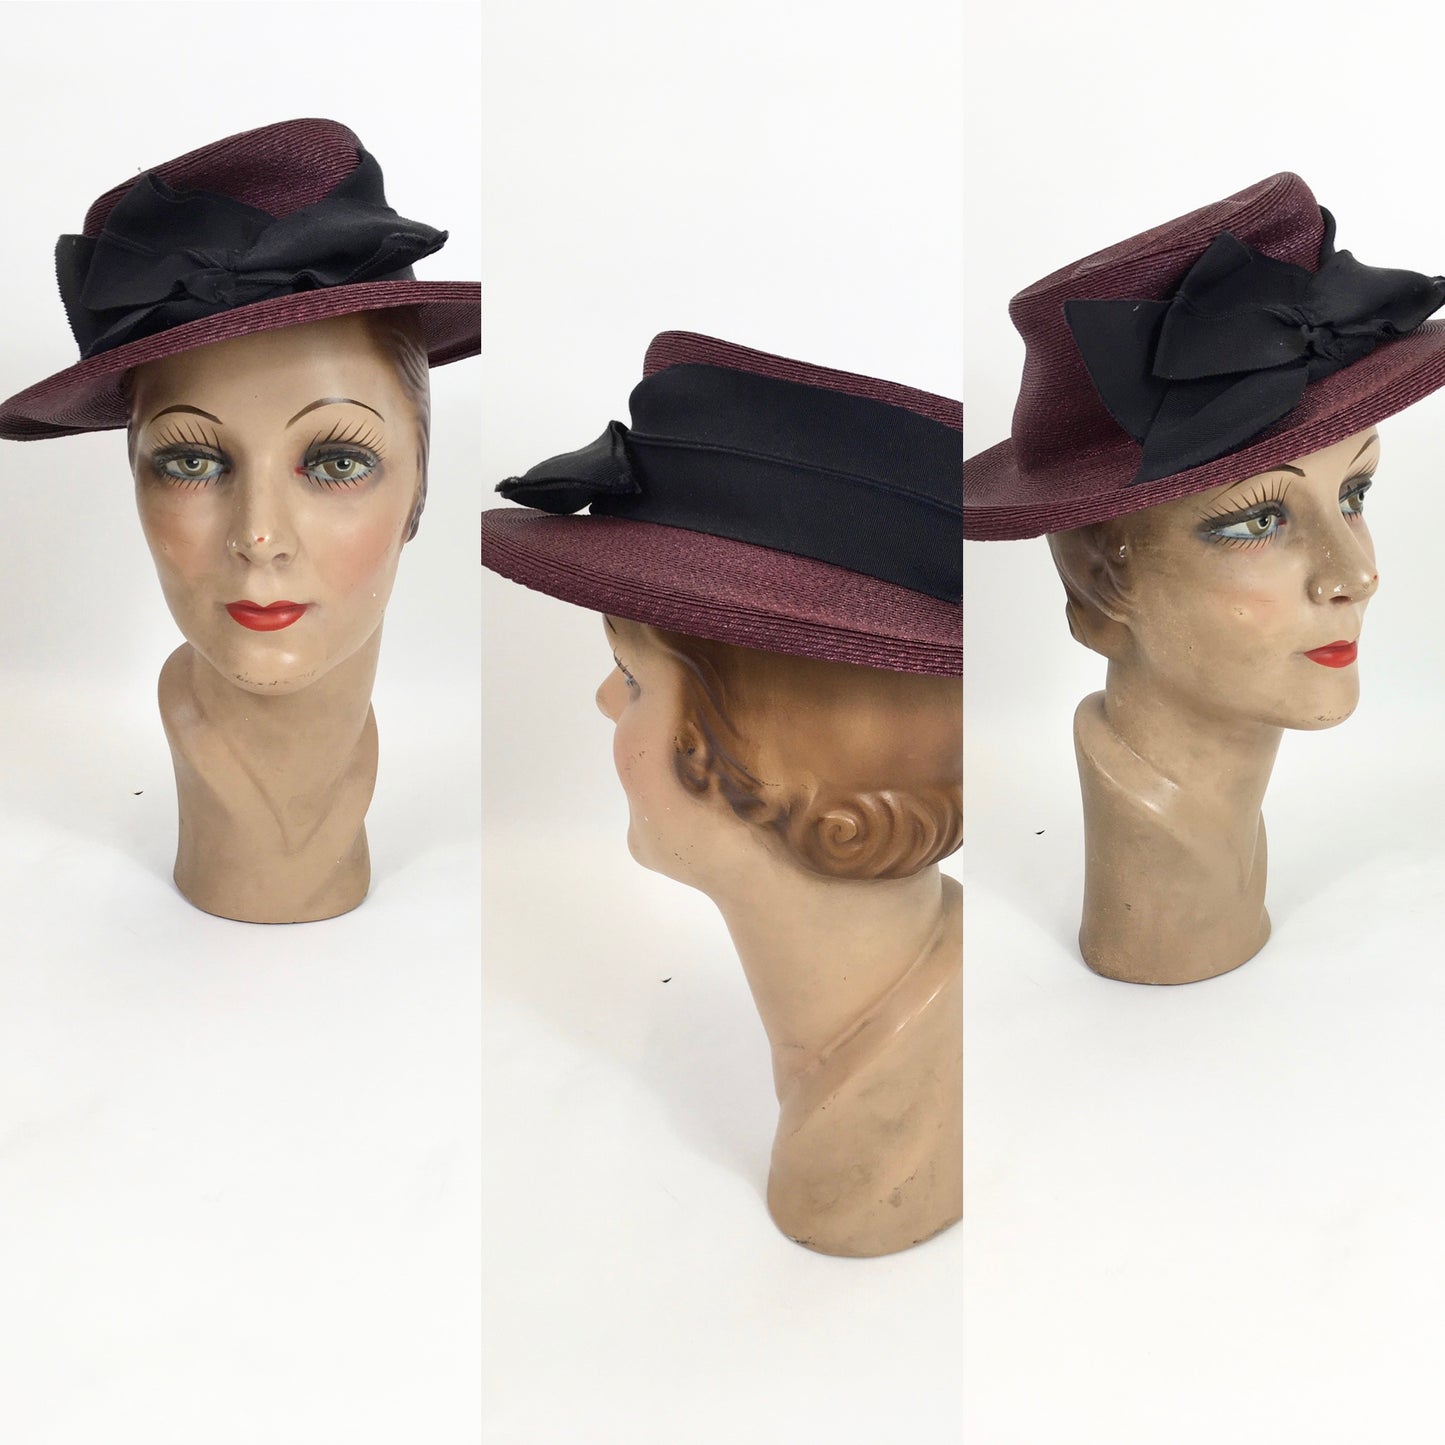 Original 1940’s Sublime Straw Tilt Hat - In A Deep Mulberry With Trim